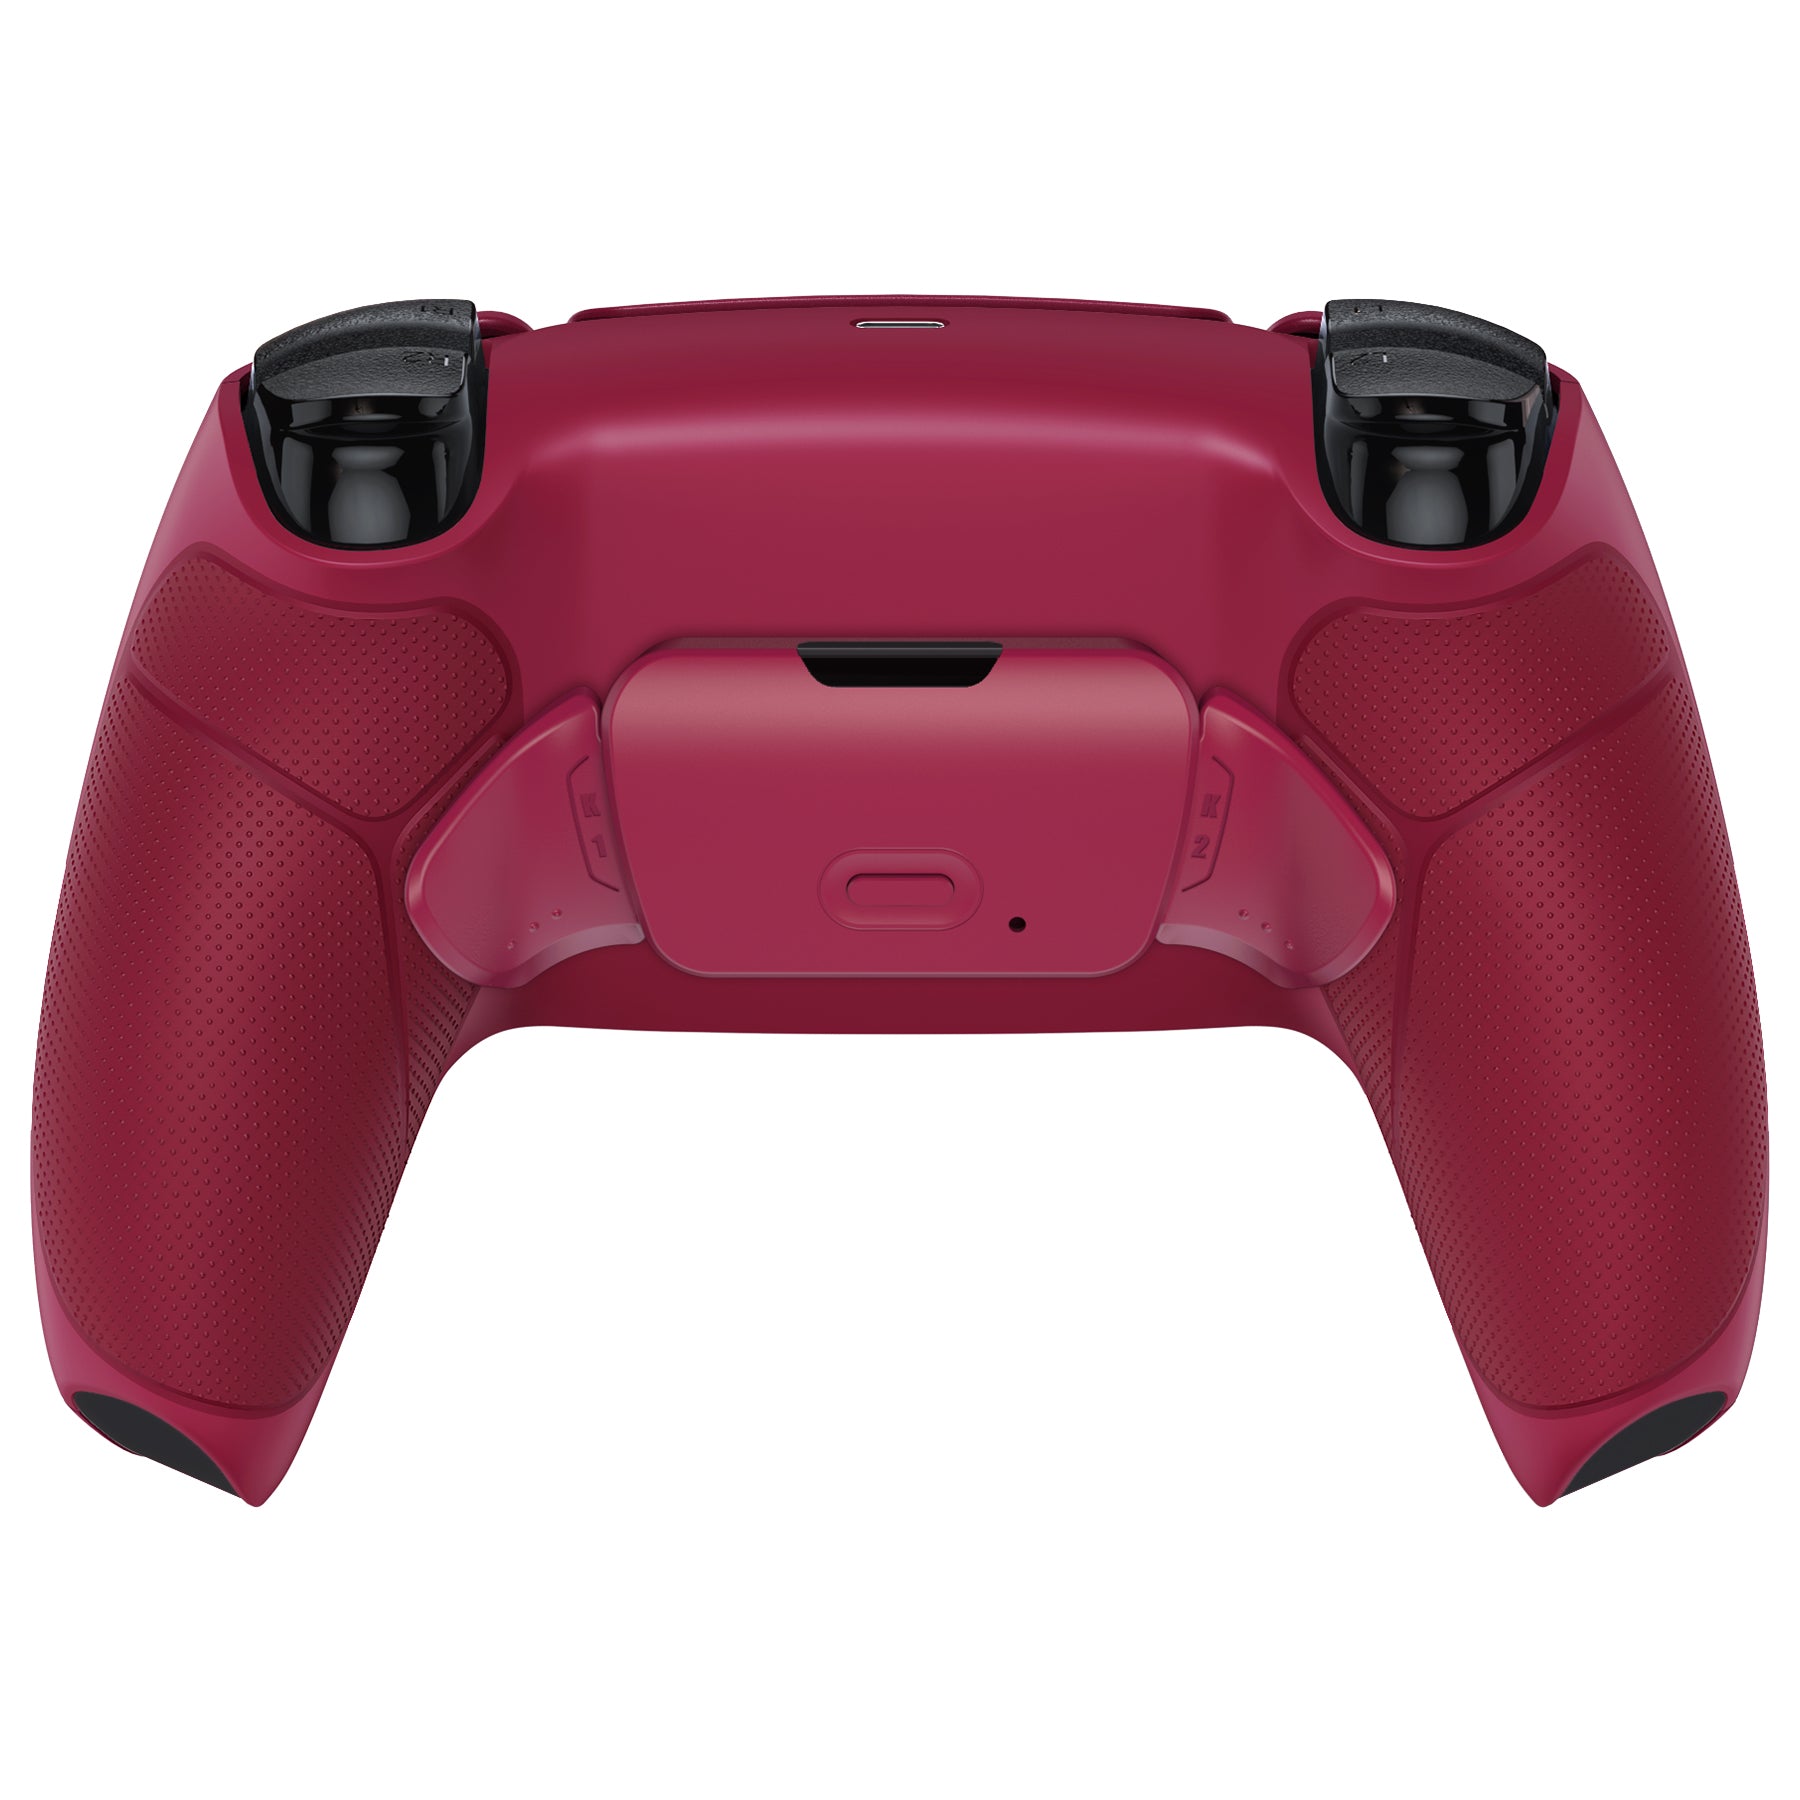 eXtremeRate Retail Cosmic Red Rubberized Grip Back Paddles Remappable Rise Remap Kit with Upgrade Board & Redesigned Back Shell & Back Buttons Attachment for PS5 Controller BDM-010 & BDM-020 - XPFU6008